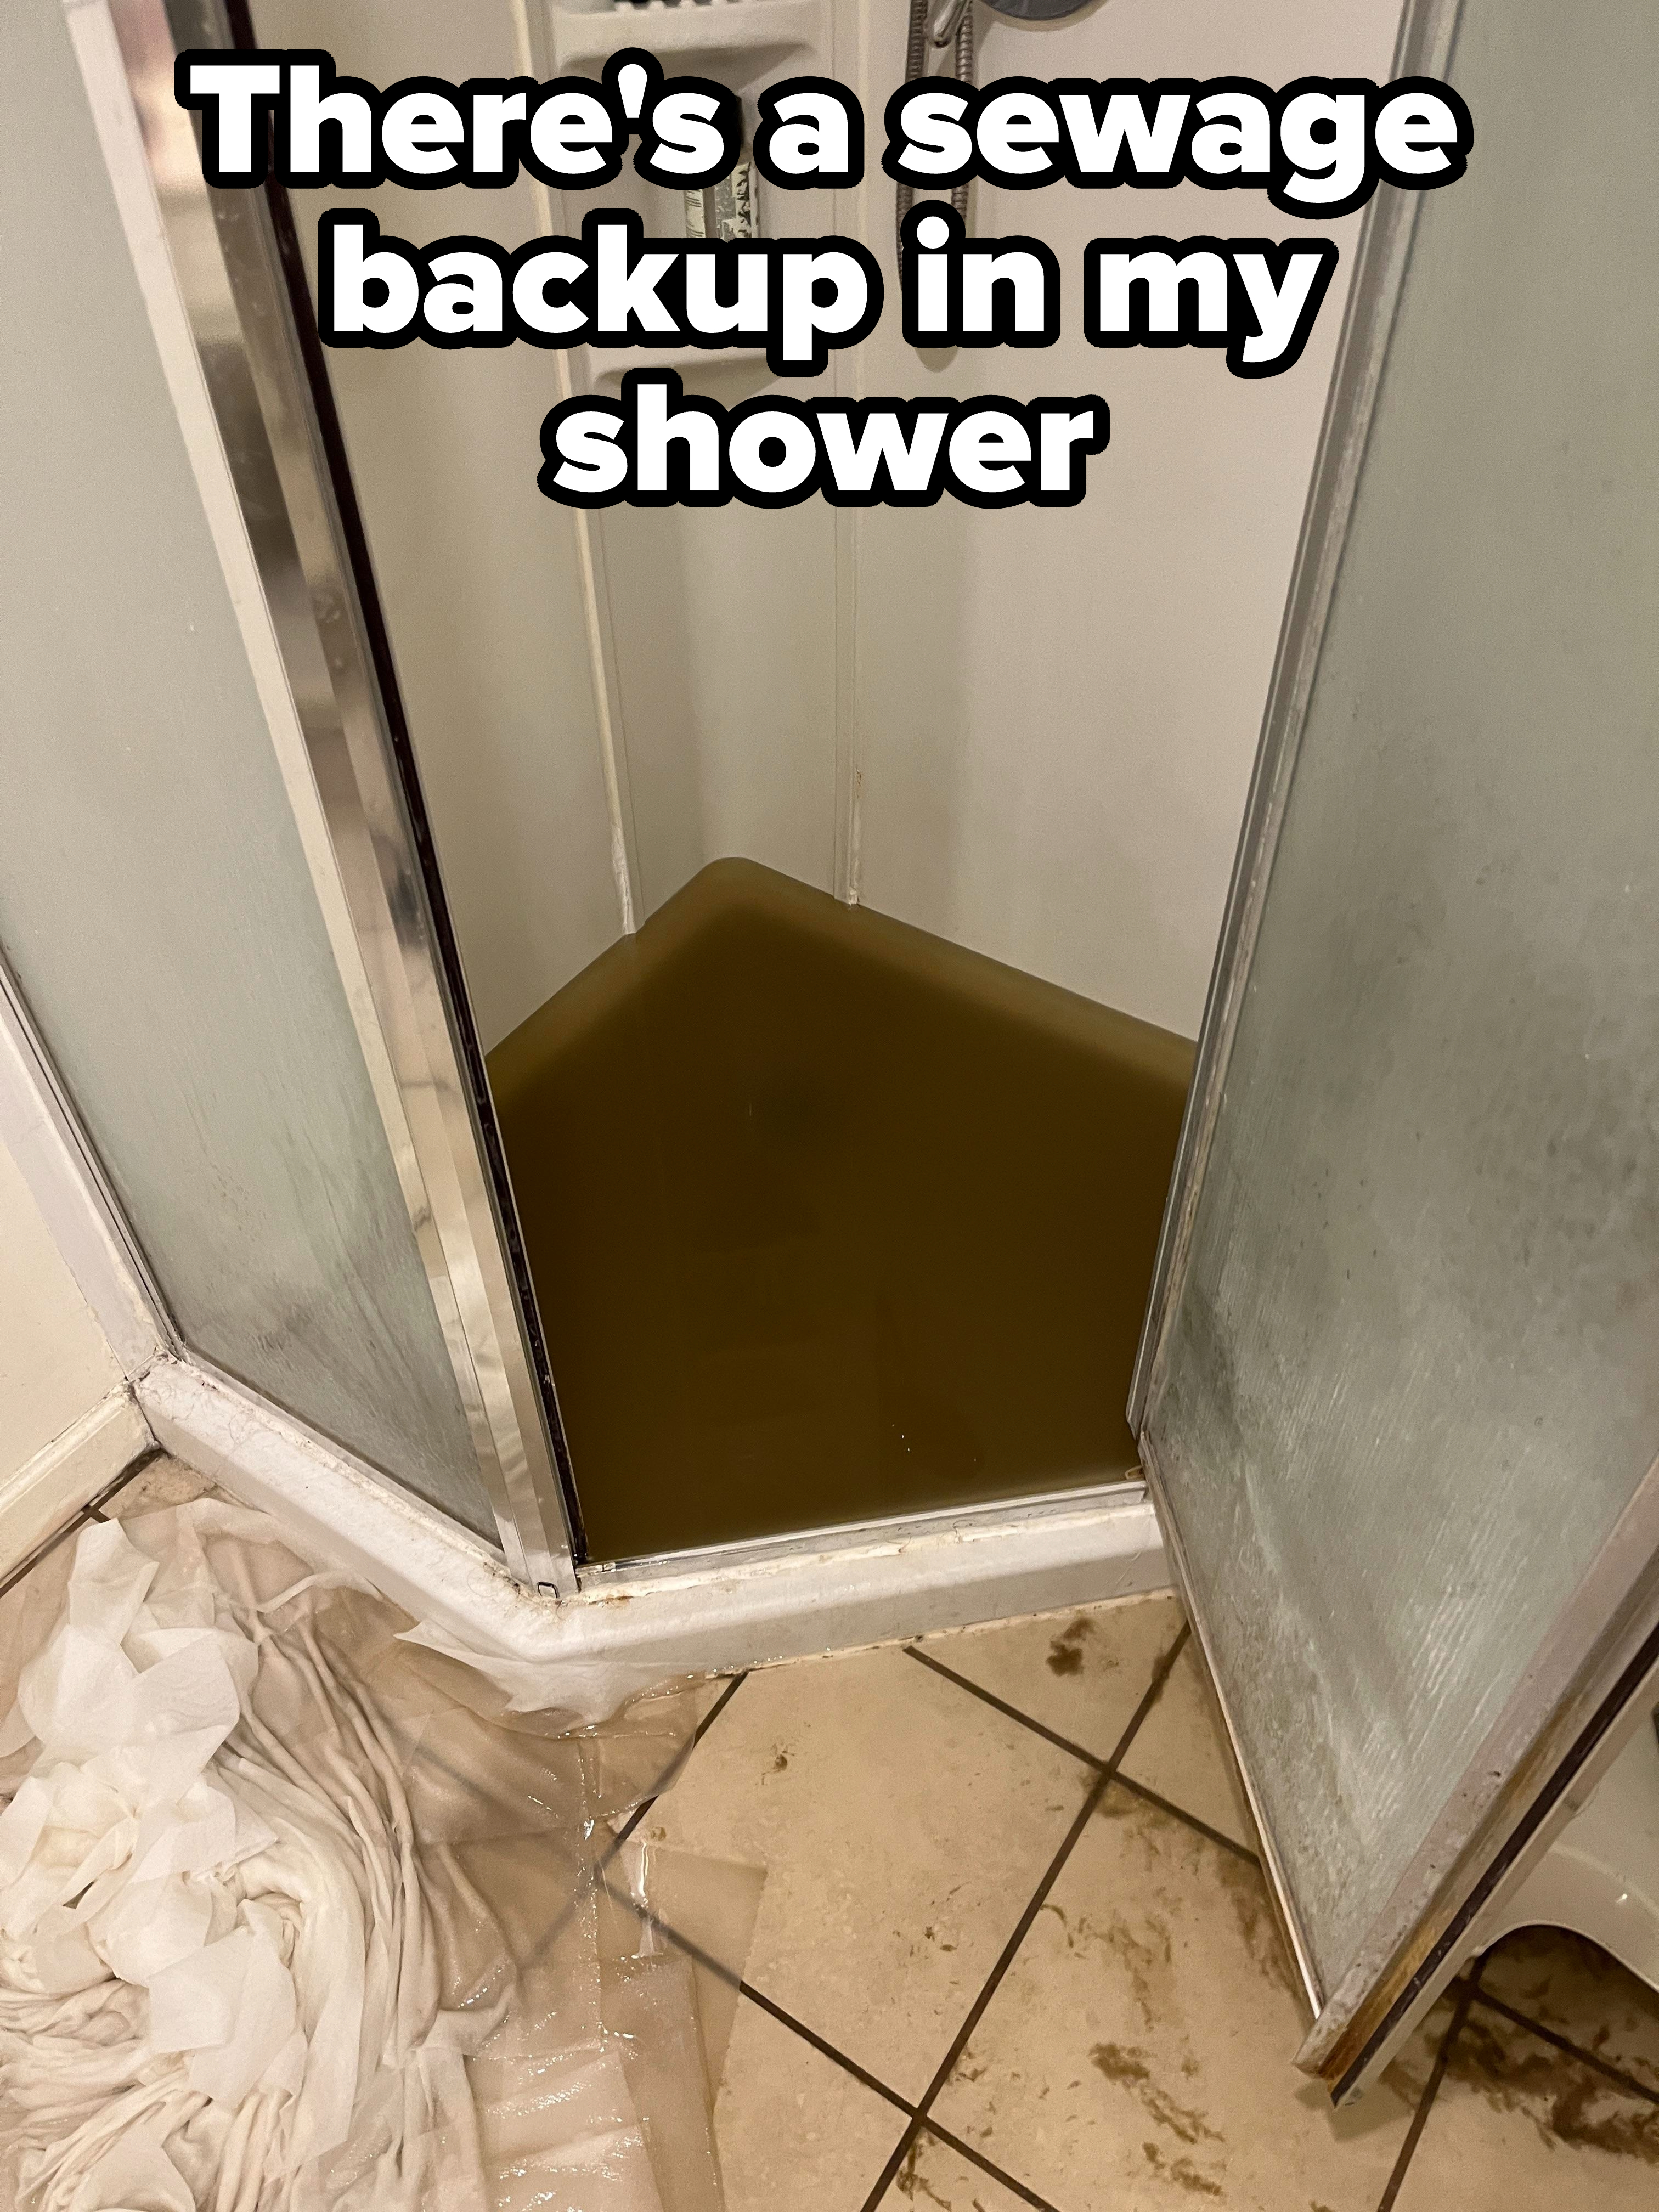 &quot;There&#x27;s a sewage backup in my shower&quot;